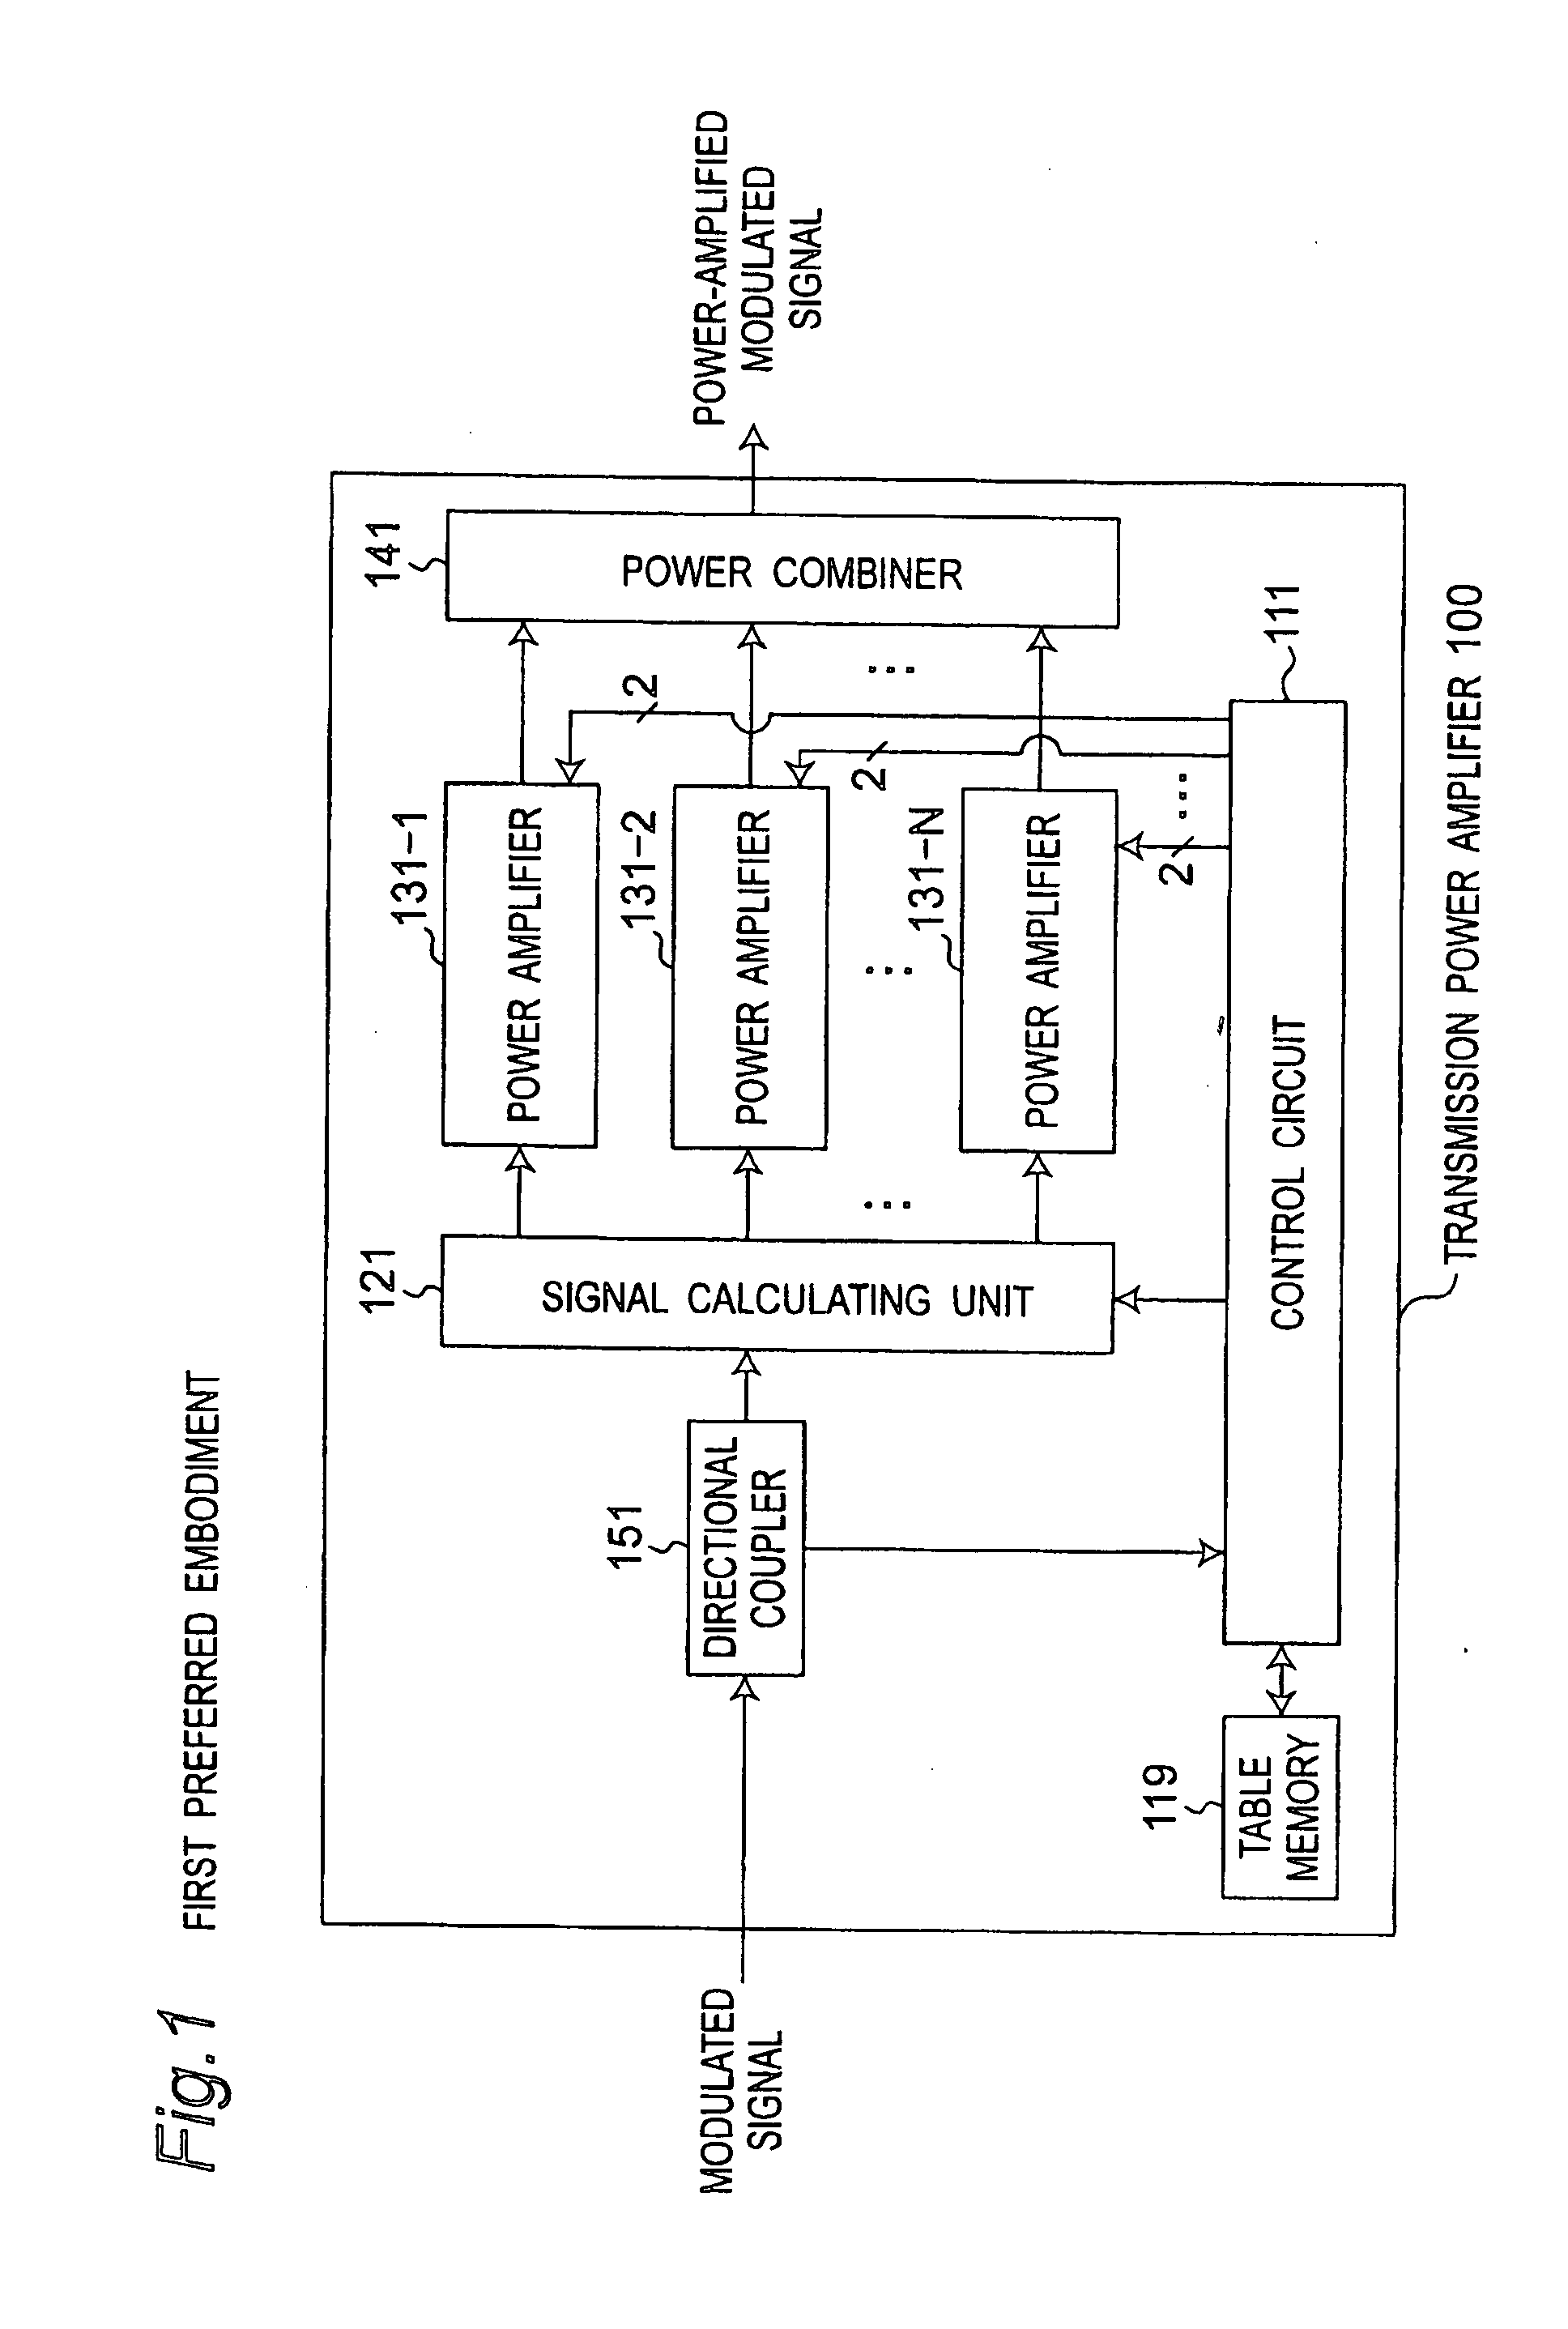 Transmission power amplifier apparatus for combining power-amplified constant amplitude signals each having controlled constant amplitude value and phase